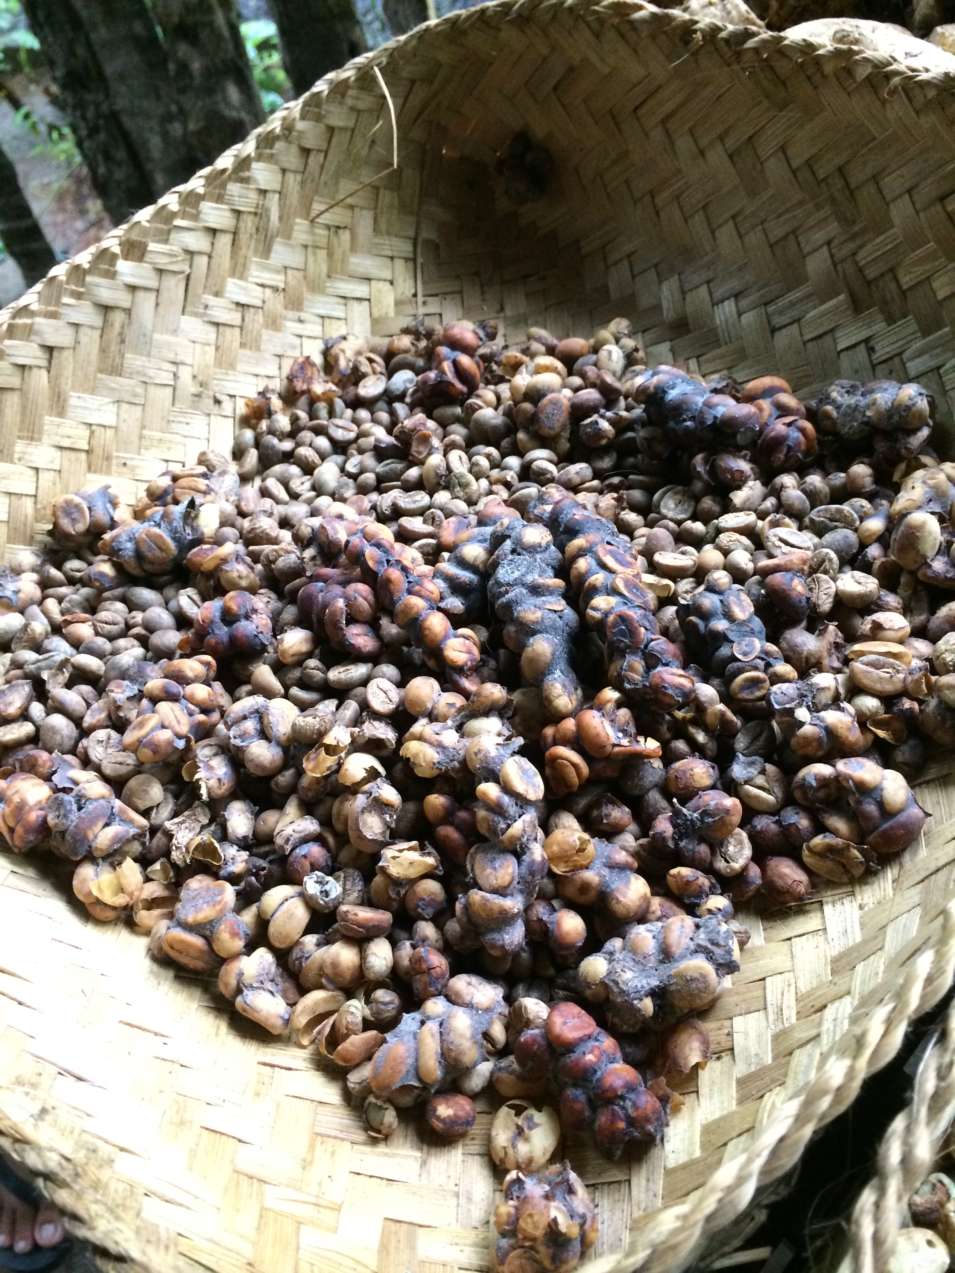 Kopi Luwak as it is collected.